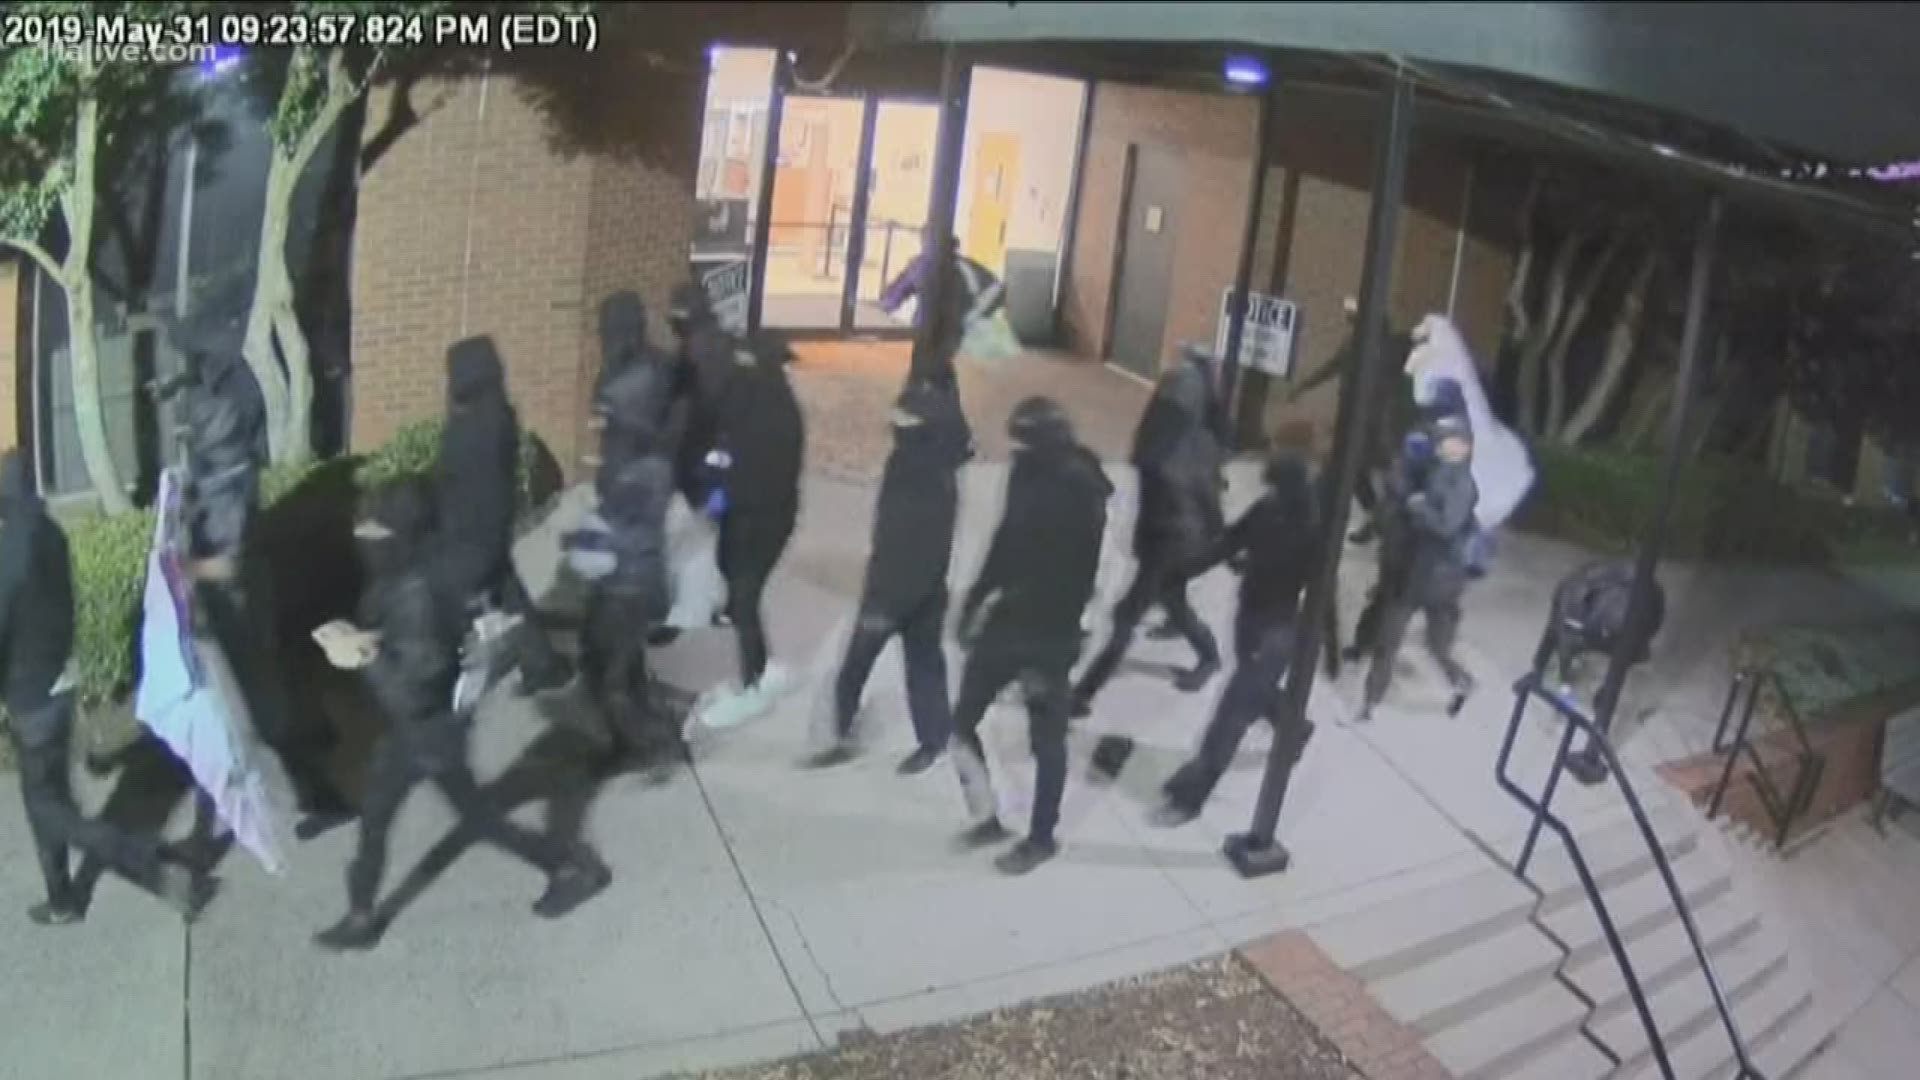 Video showed 20 to 26 people armed with hammers, pickaxes and spray paint swarm the building.